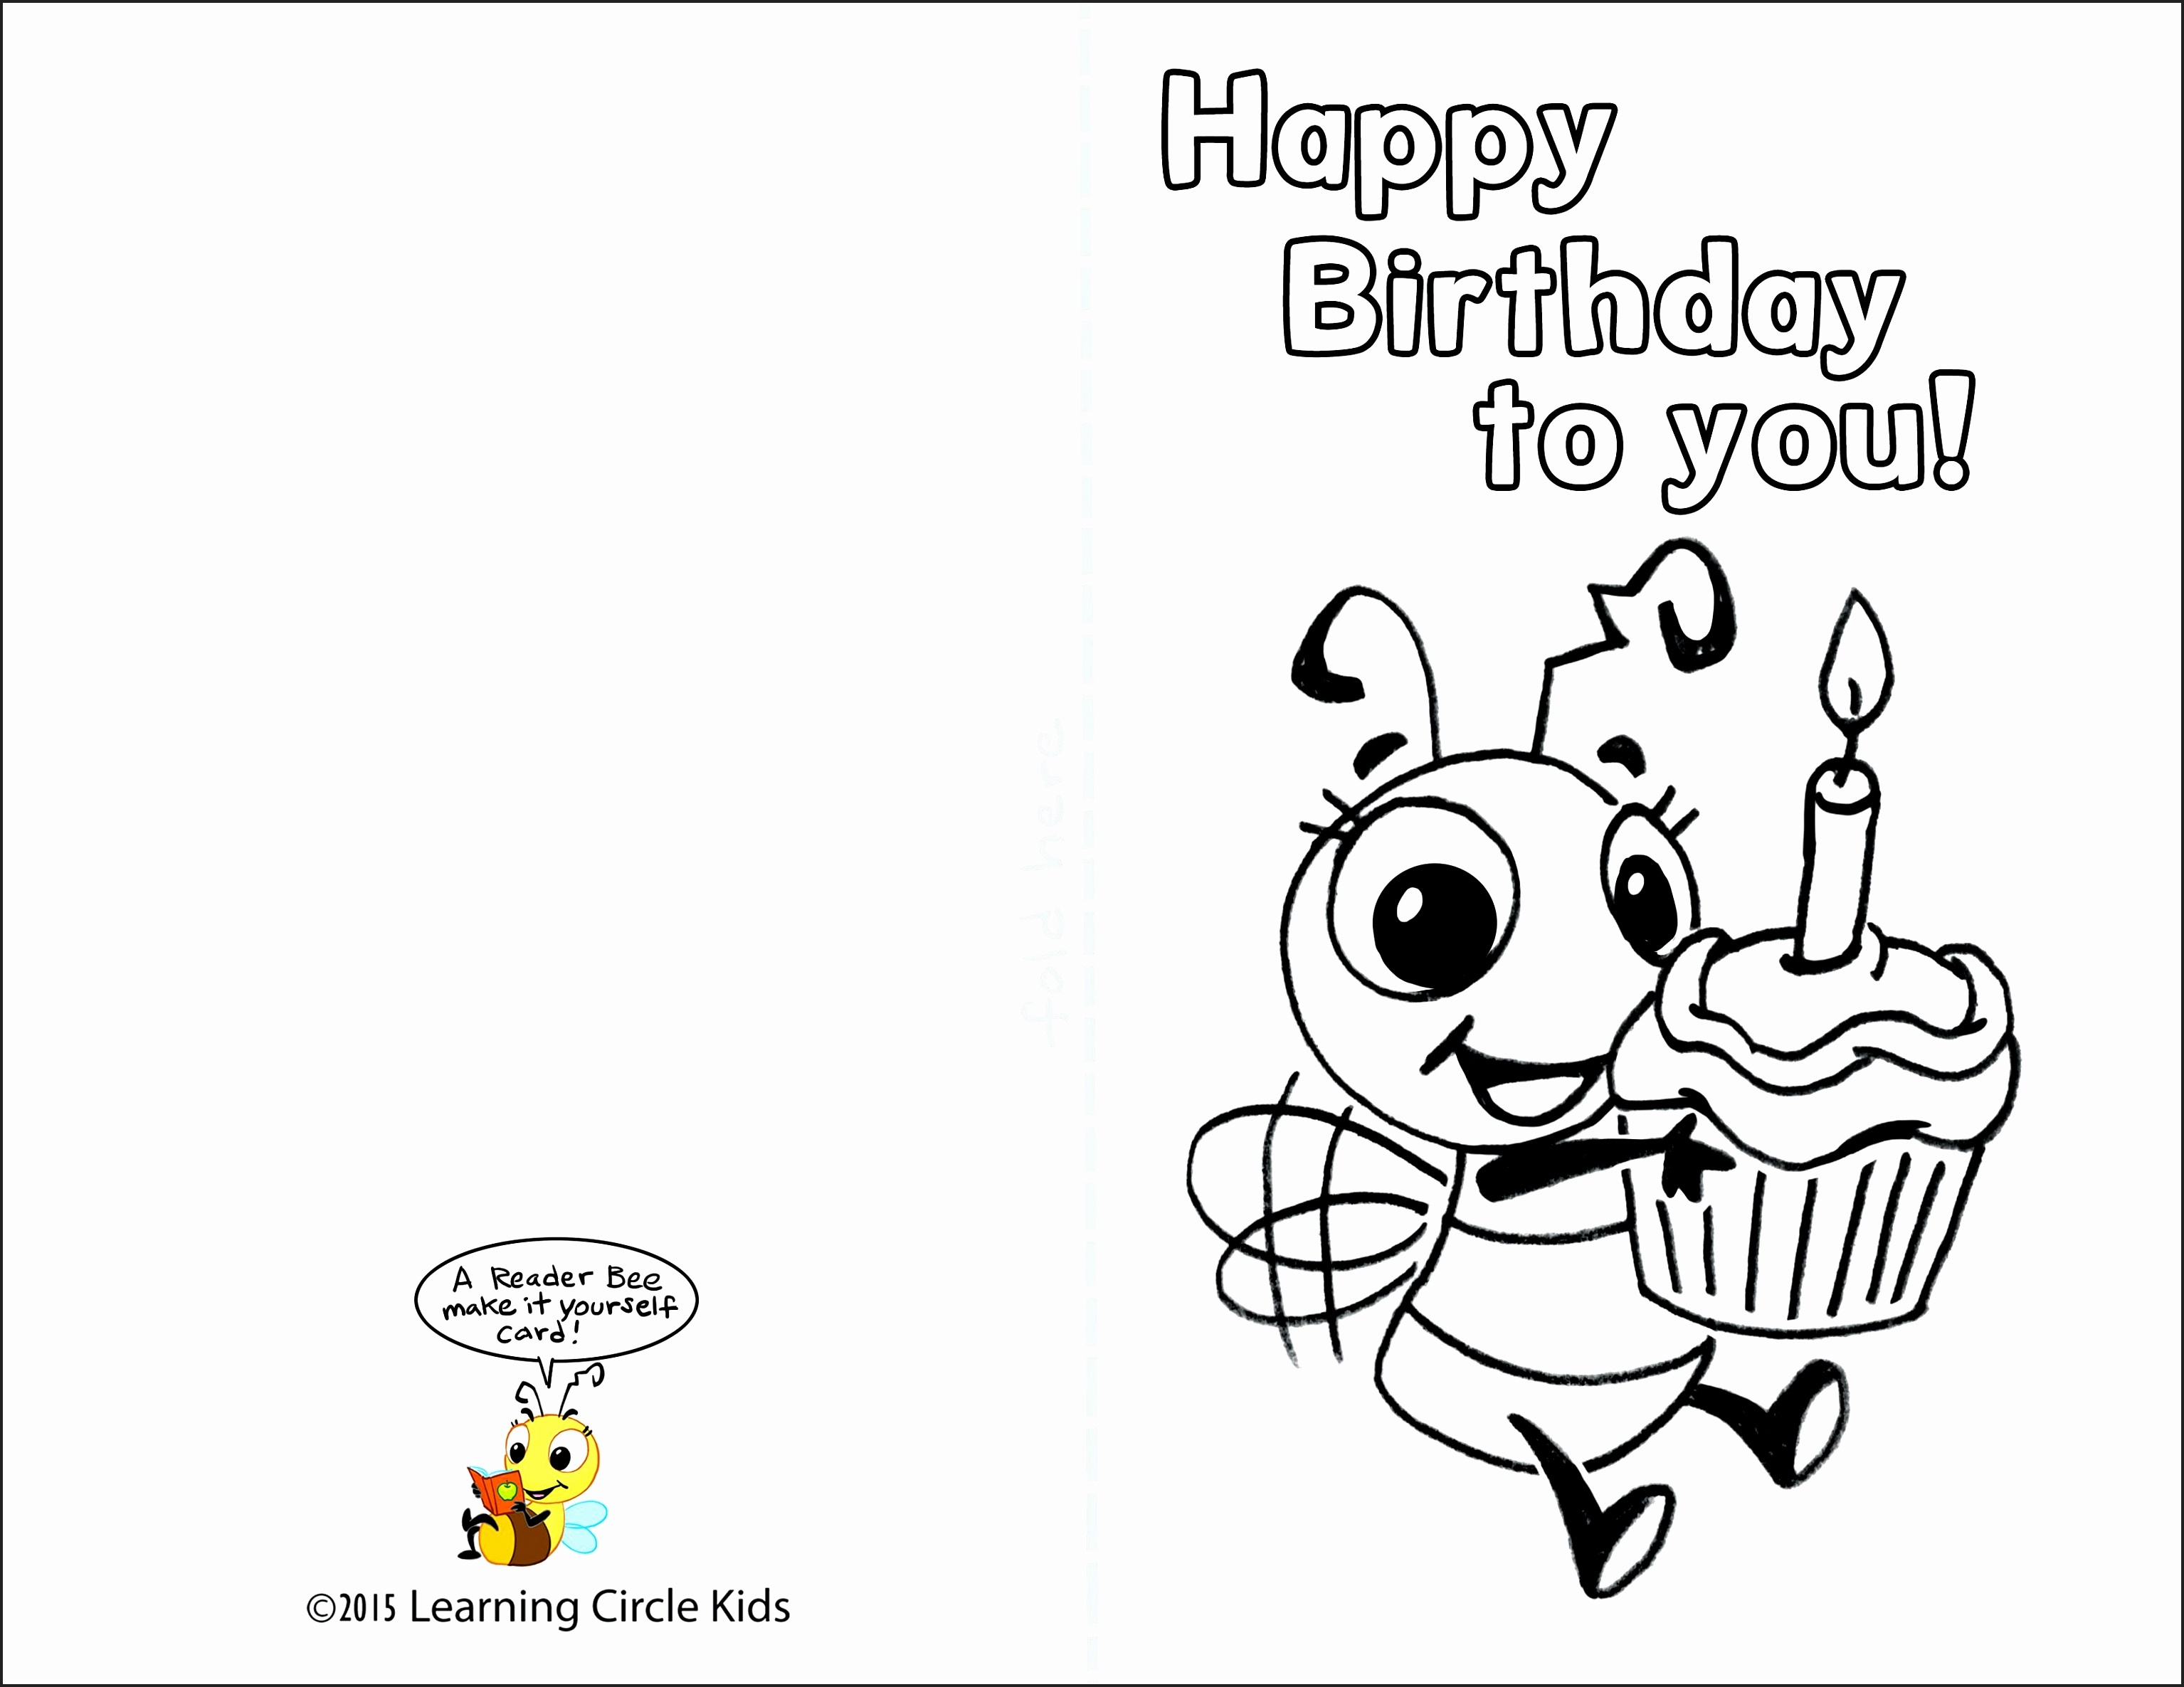 Free Printable Birthday Cards To Color - Printable Cards - Free Printable Cards To Color